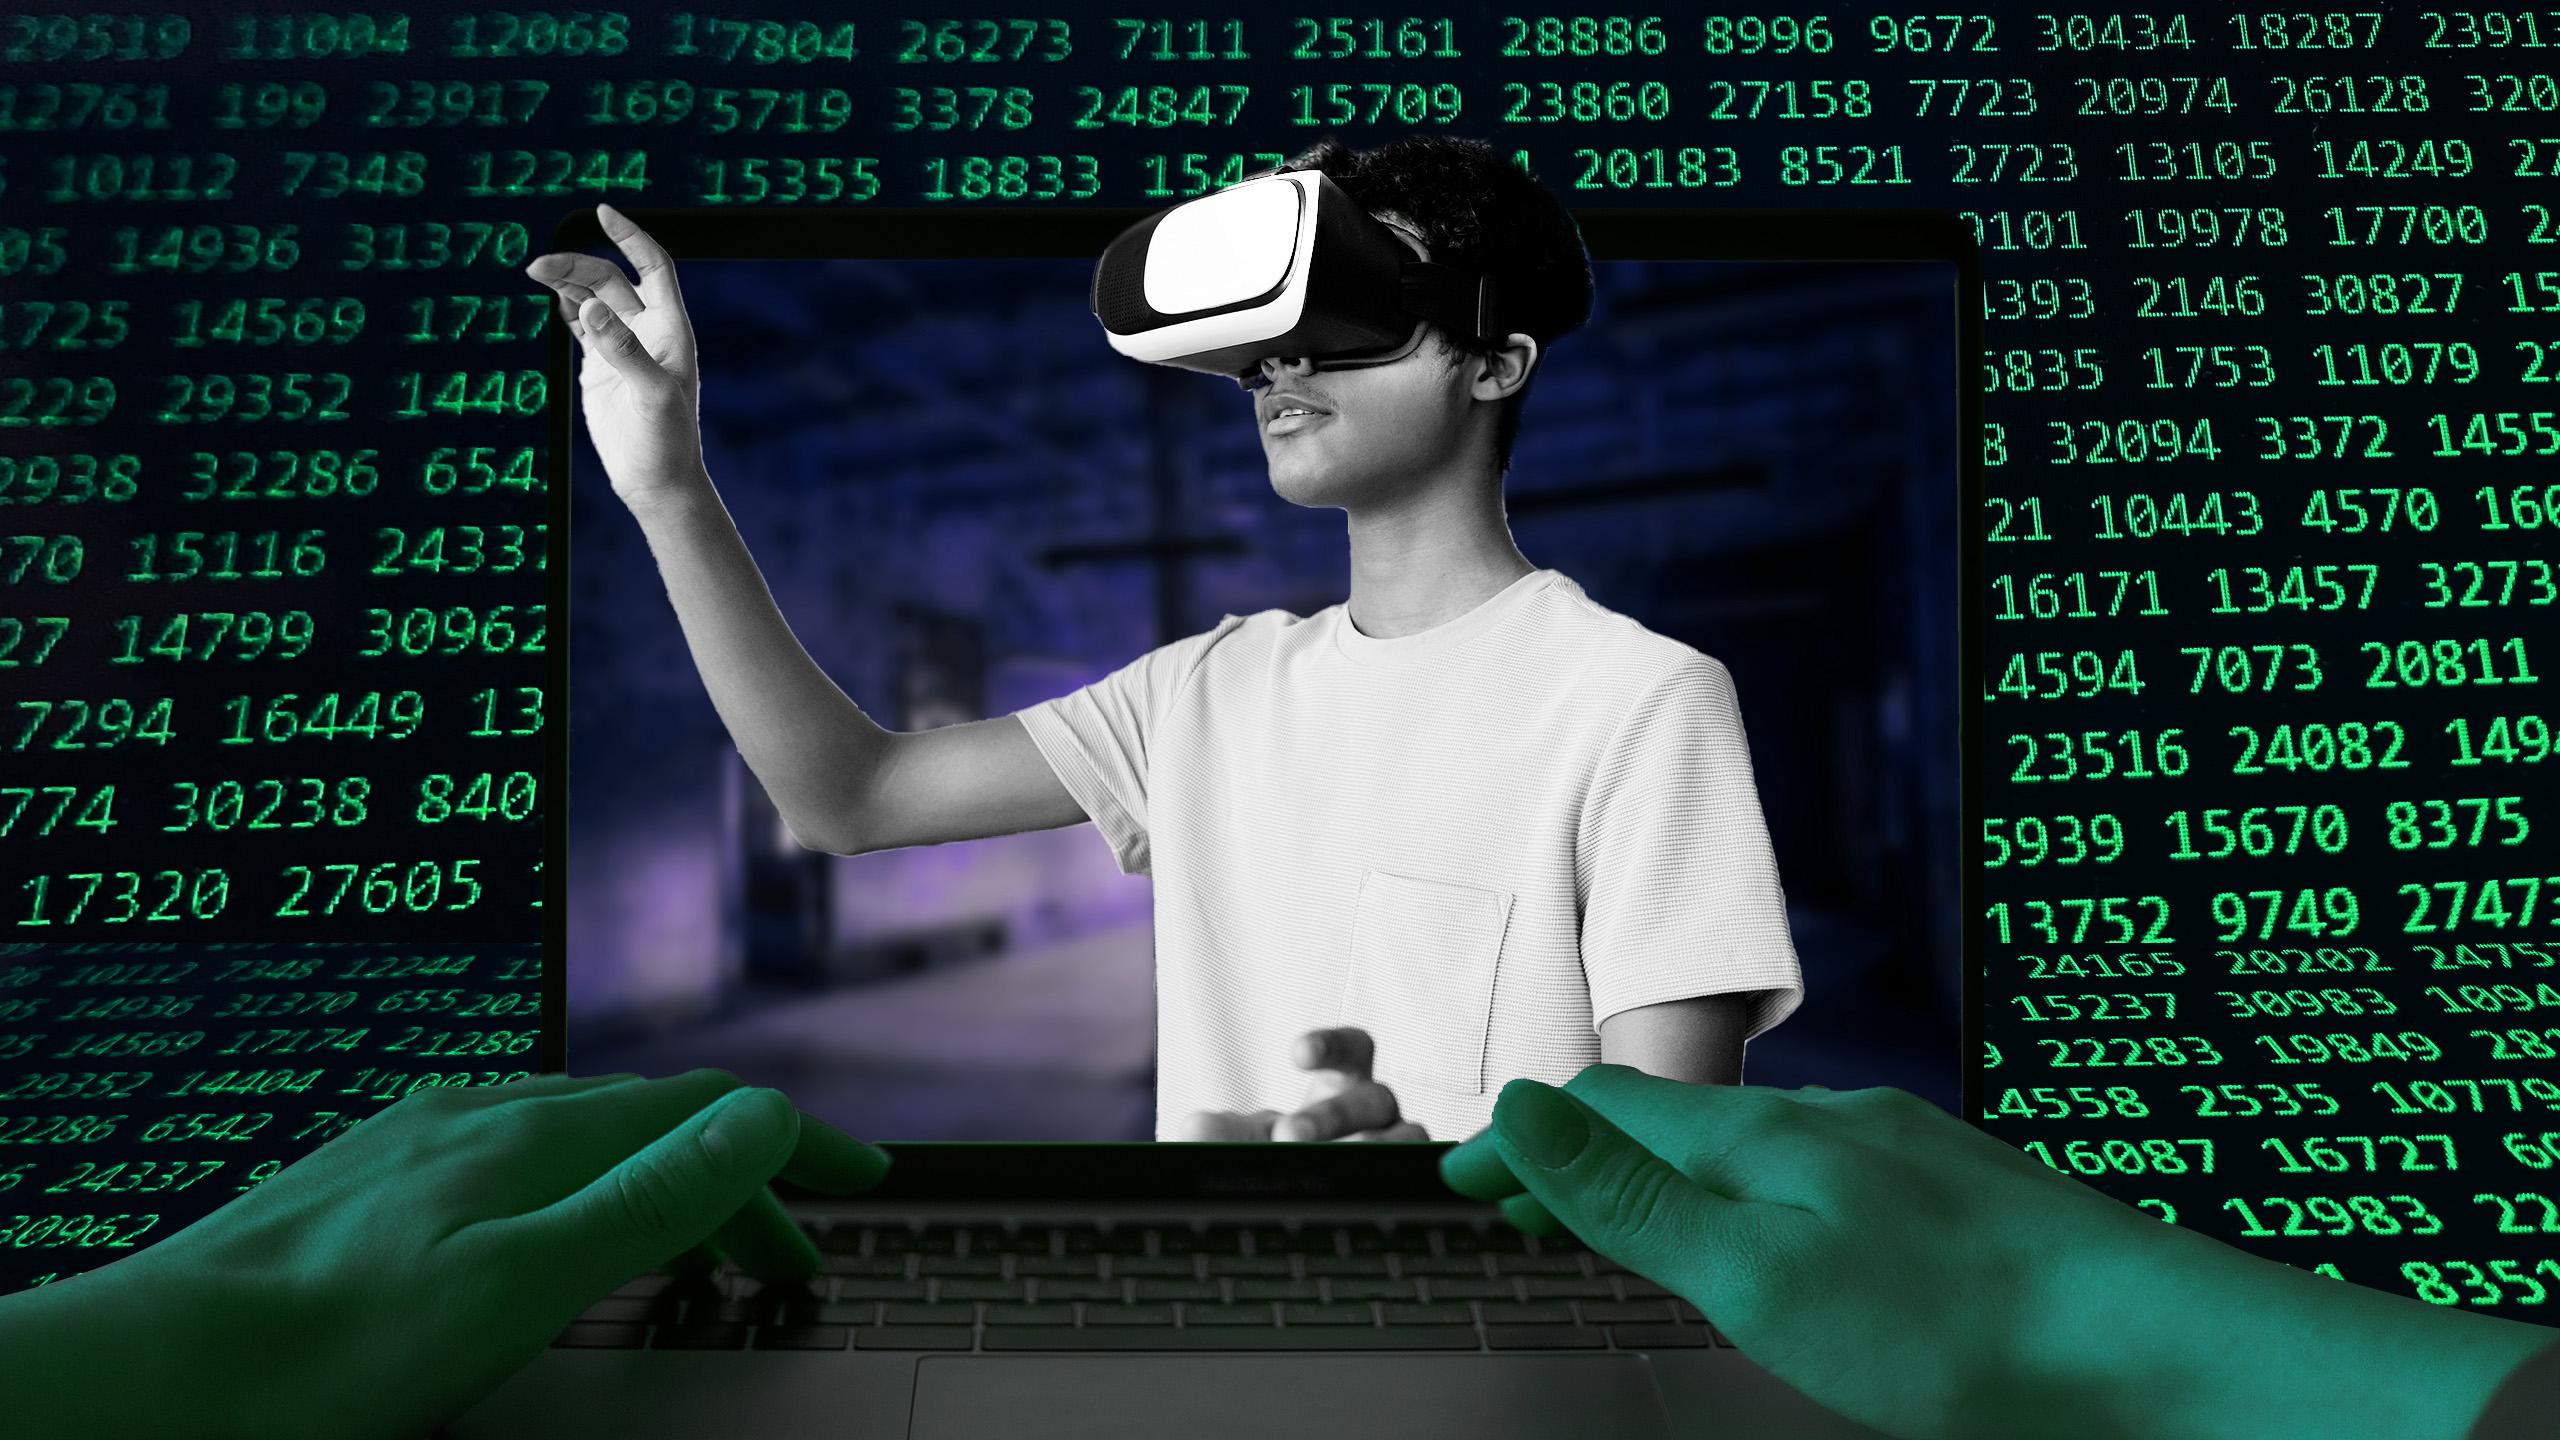 Student with virtual reality headset inside a computer screen surrounded by coding